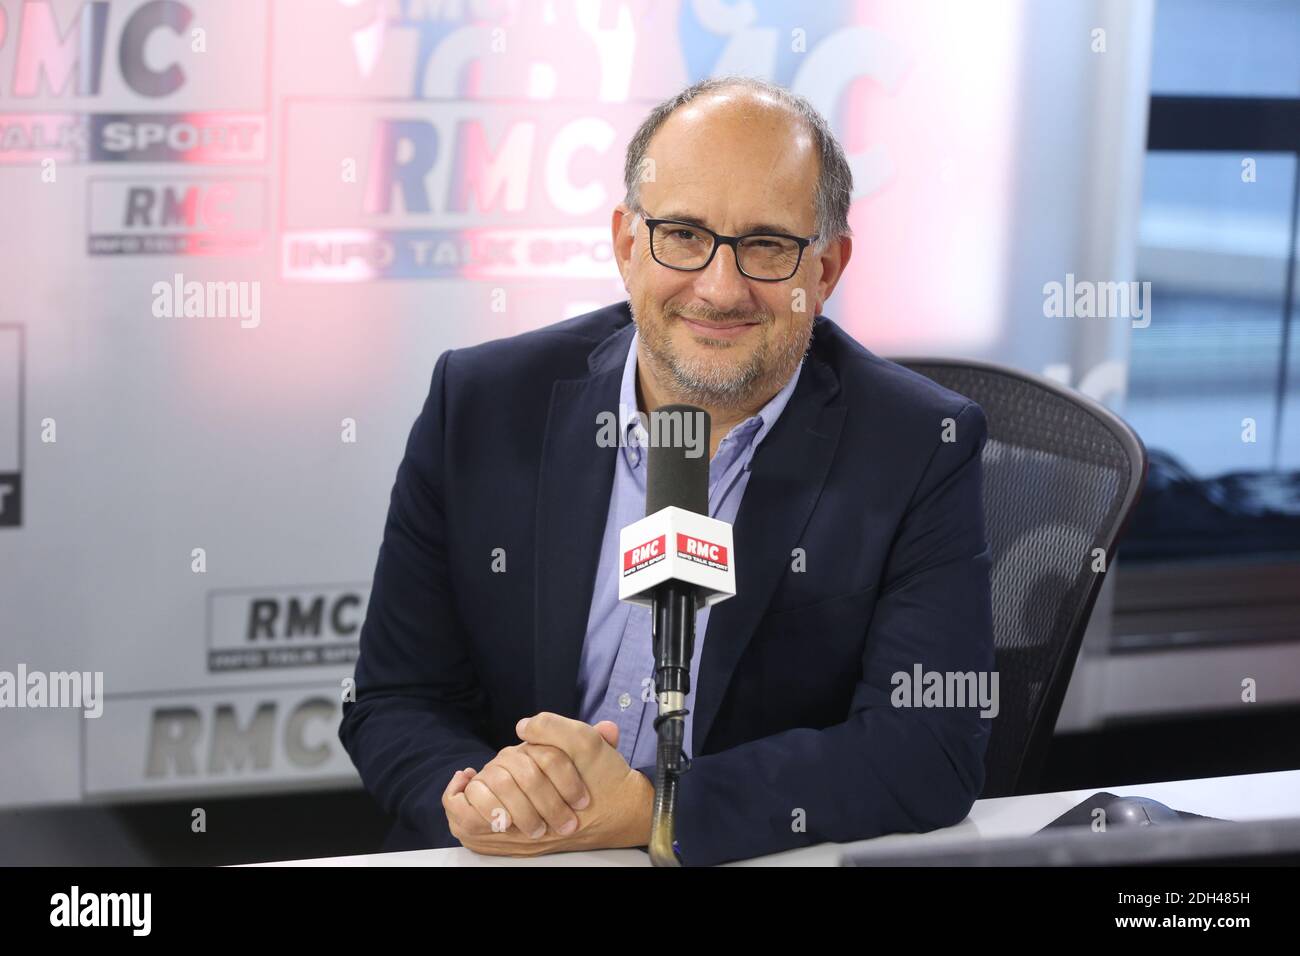 Exclusive - Francois Sorel on RMC Radio, in Paris, France, on July 13,  2017. Photo by Jerome Domine/ABACAPRESS.COM Stock Photo - Alamy